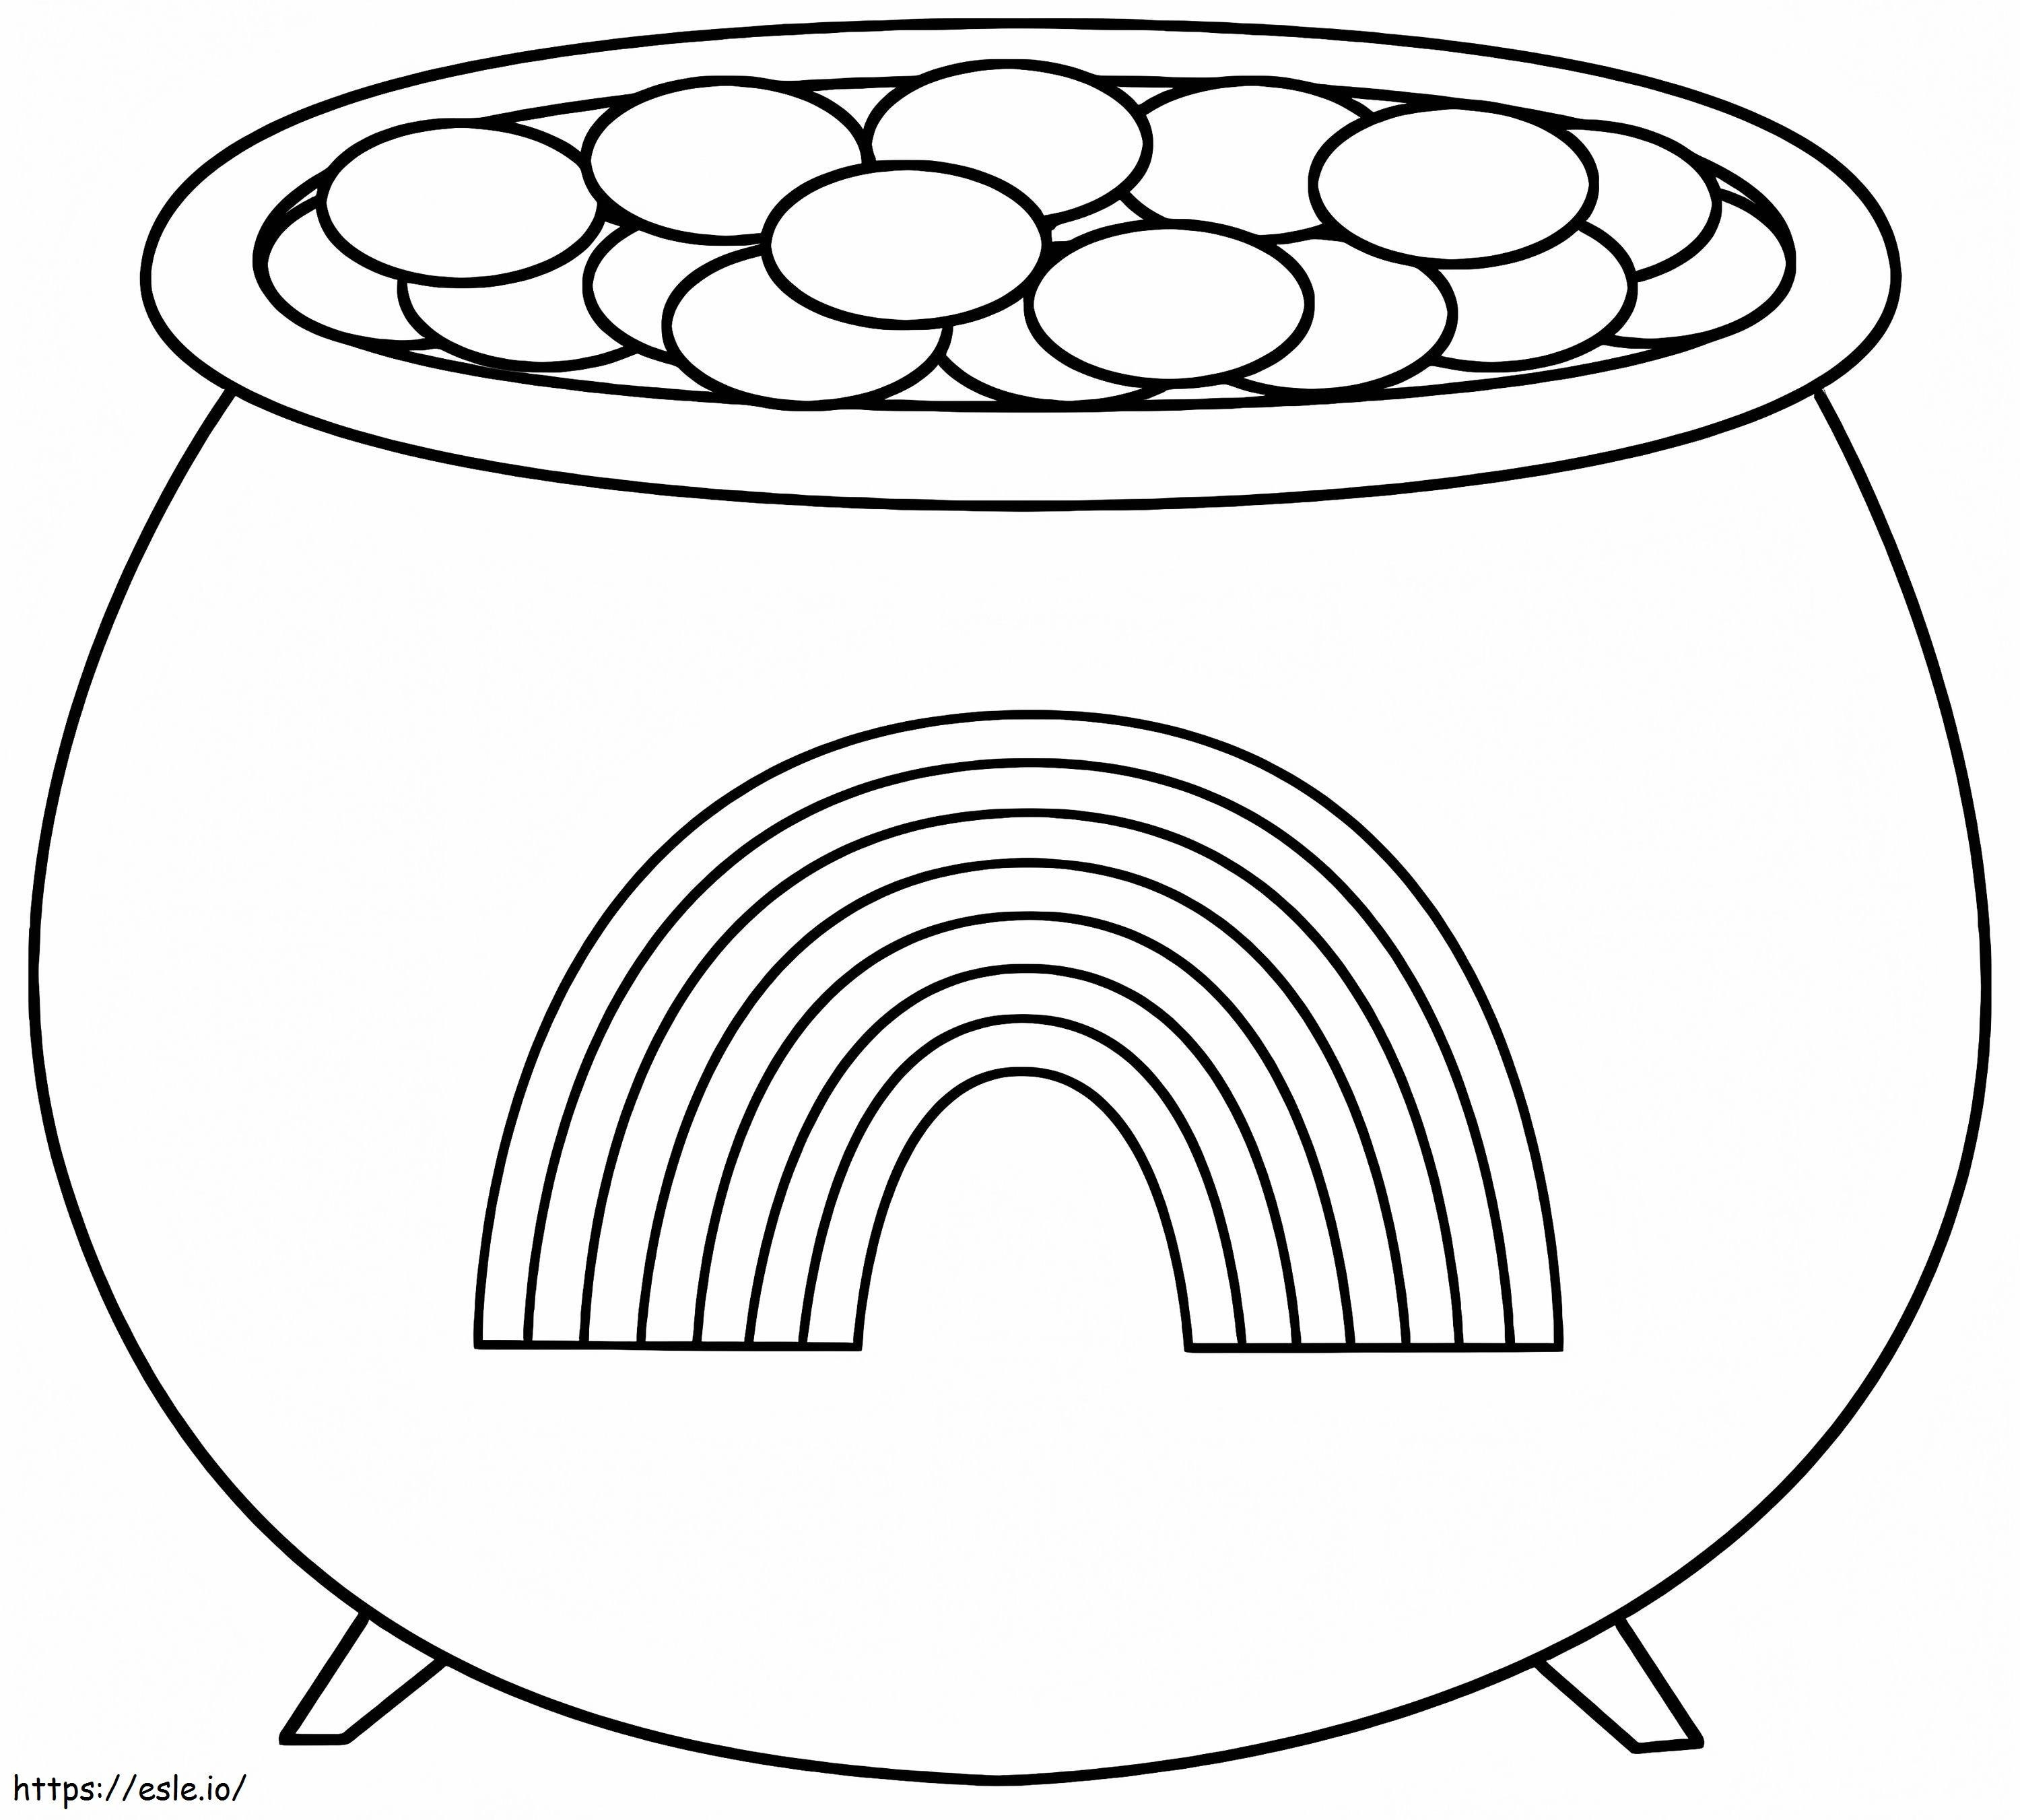 Pot Of Gold 14 coloring page